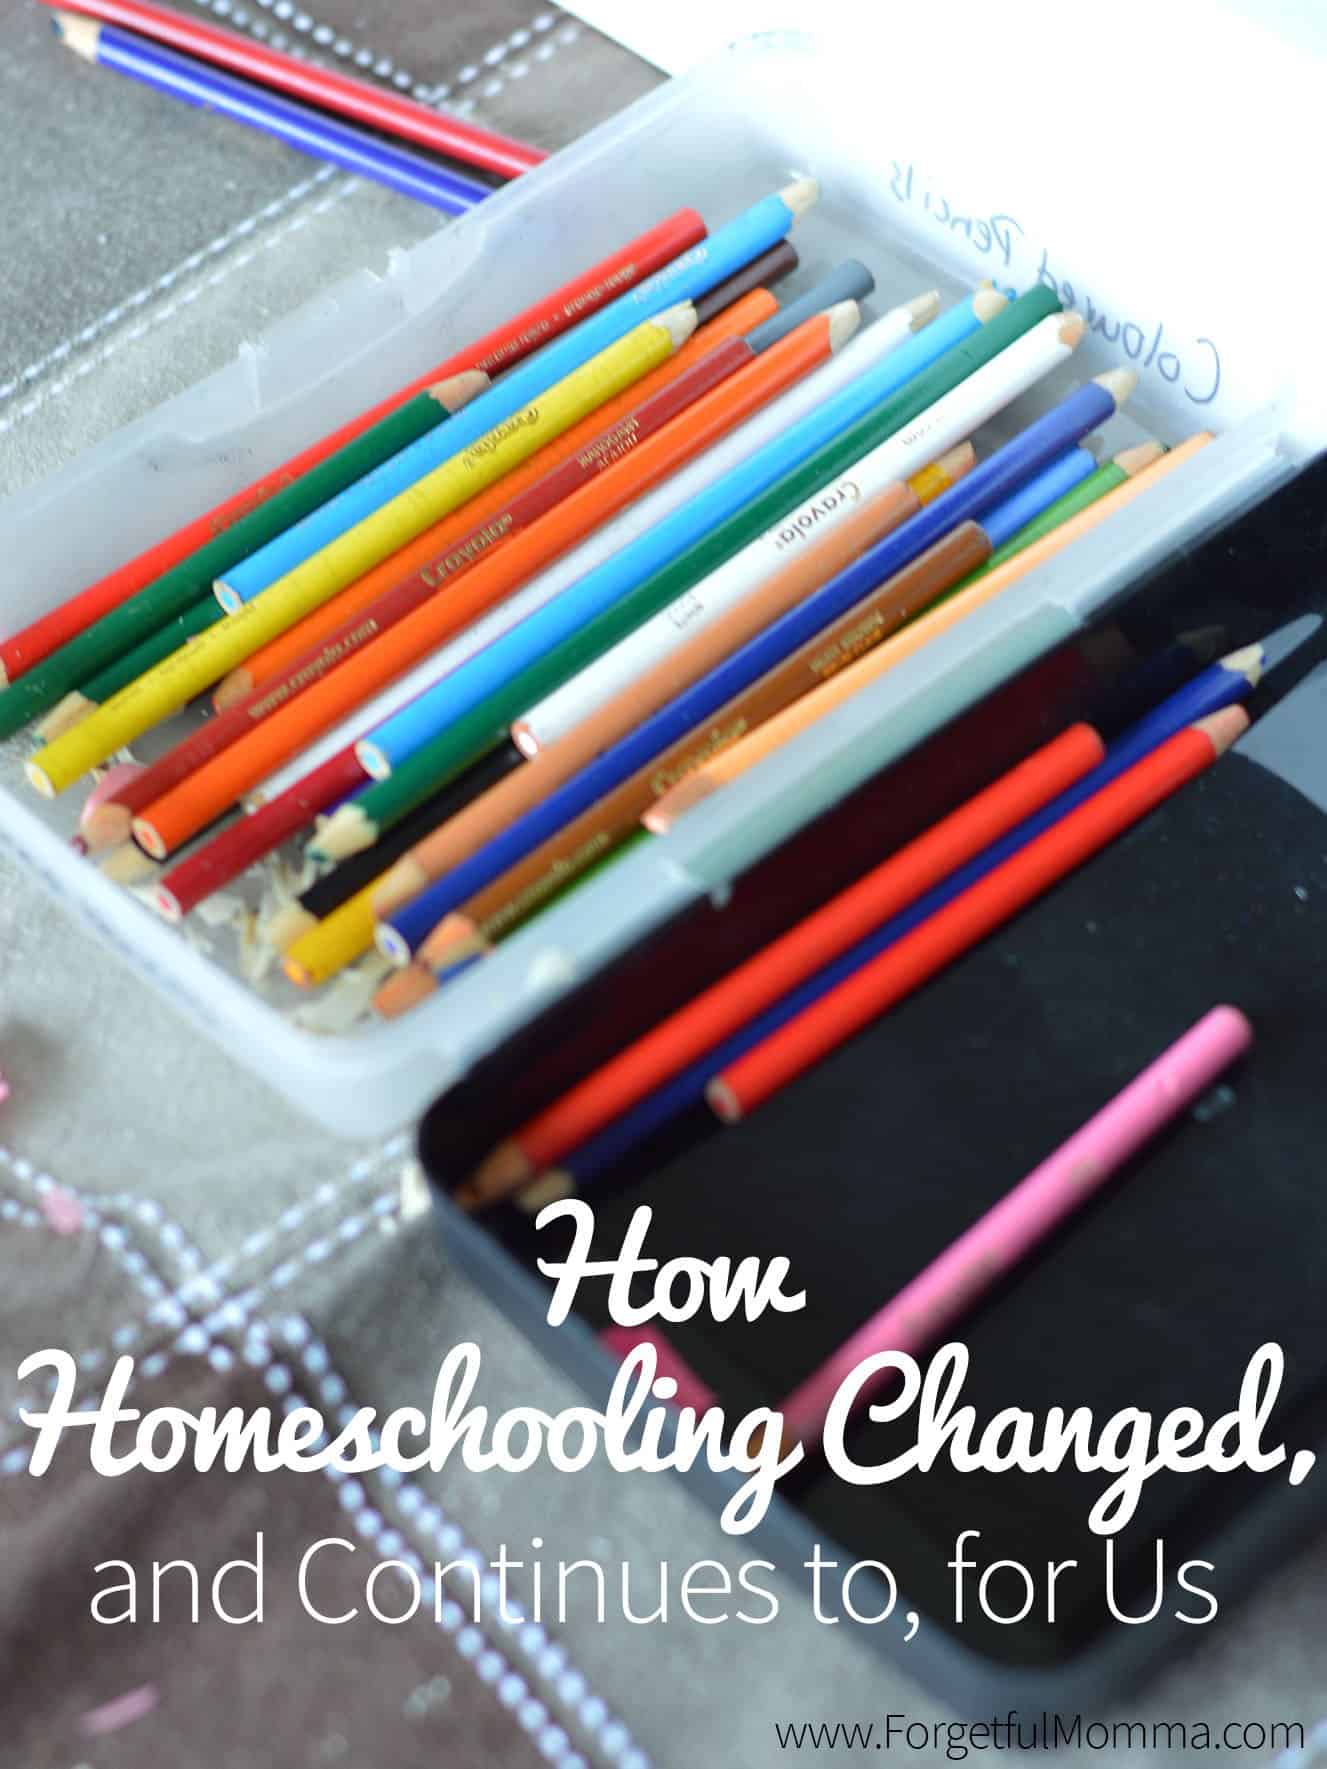 How Homeschooling has Changed, and Continues to, for Us